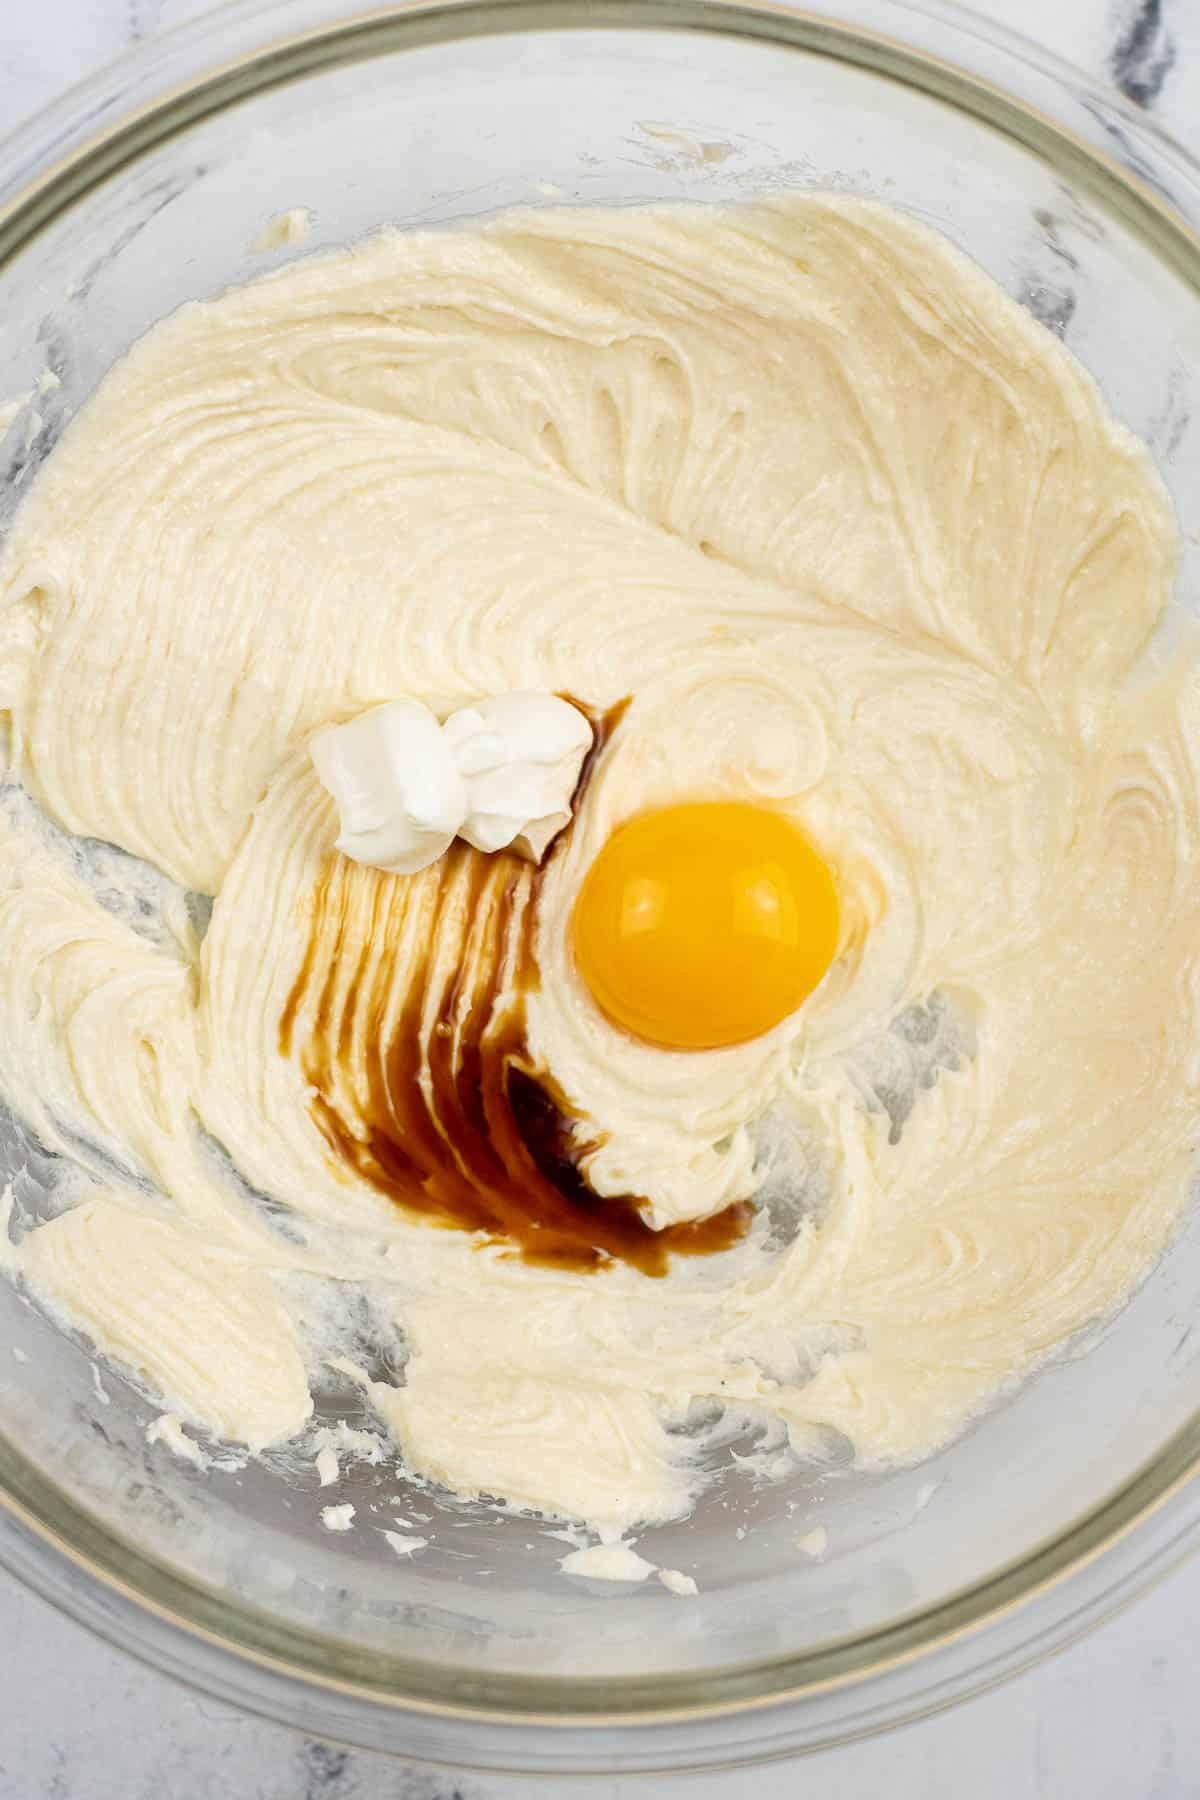 cream cheese and sugar mixture with an egg yolk on top.